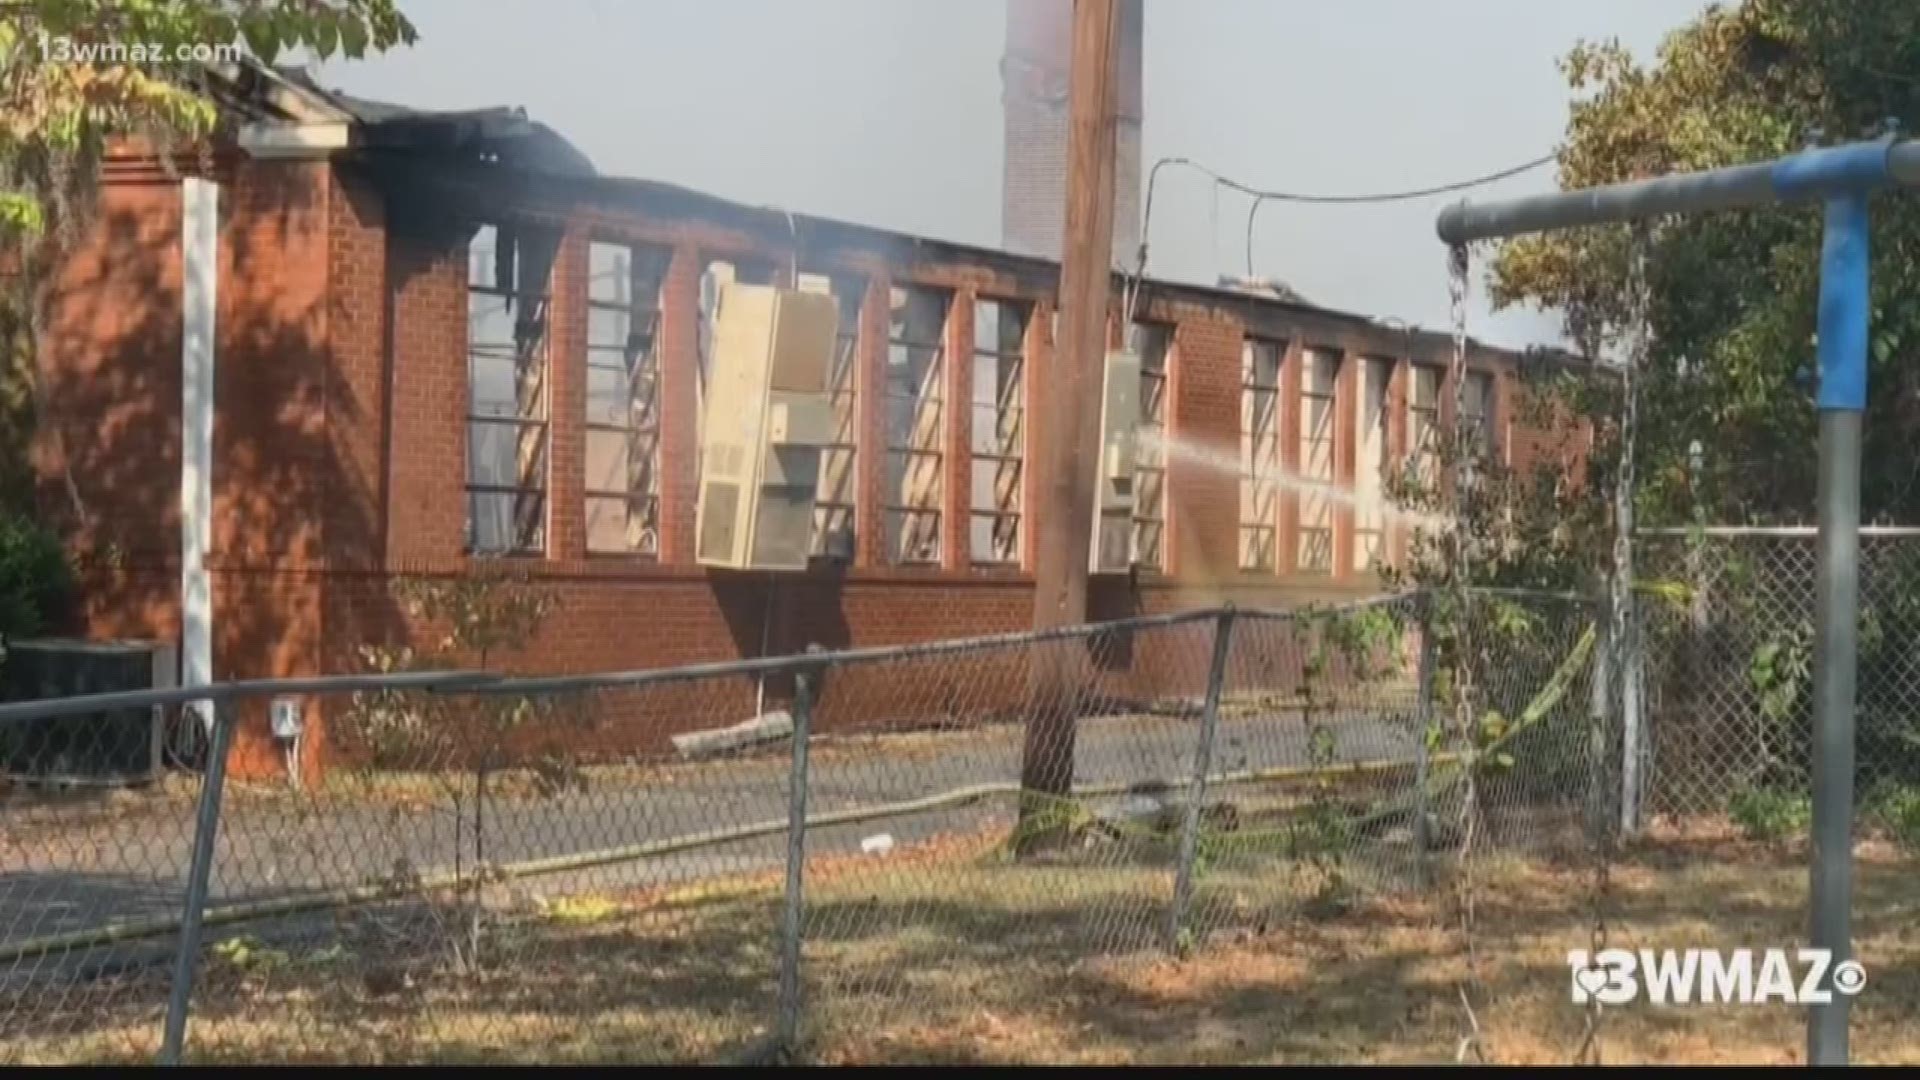 A fire ripped through an old Dublin school building Friday. It was used for a lot of things by the people of Dublin, and now the community is mourning its loss.